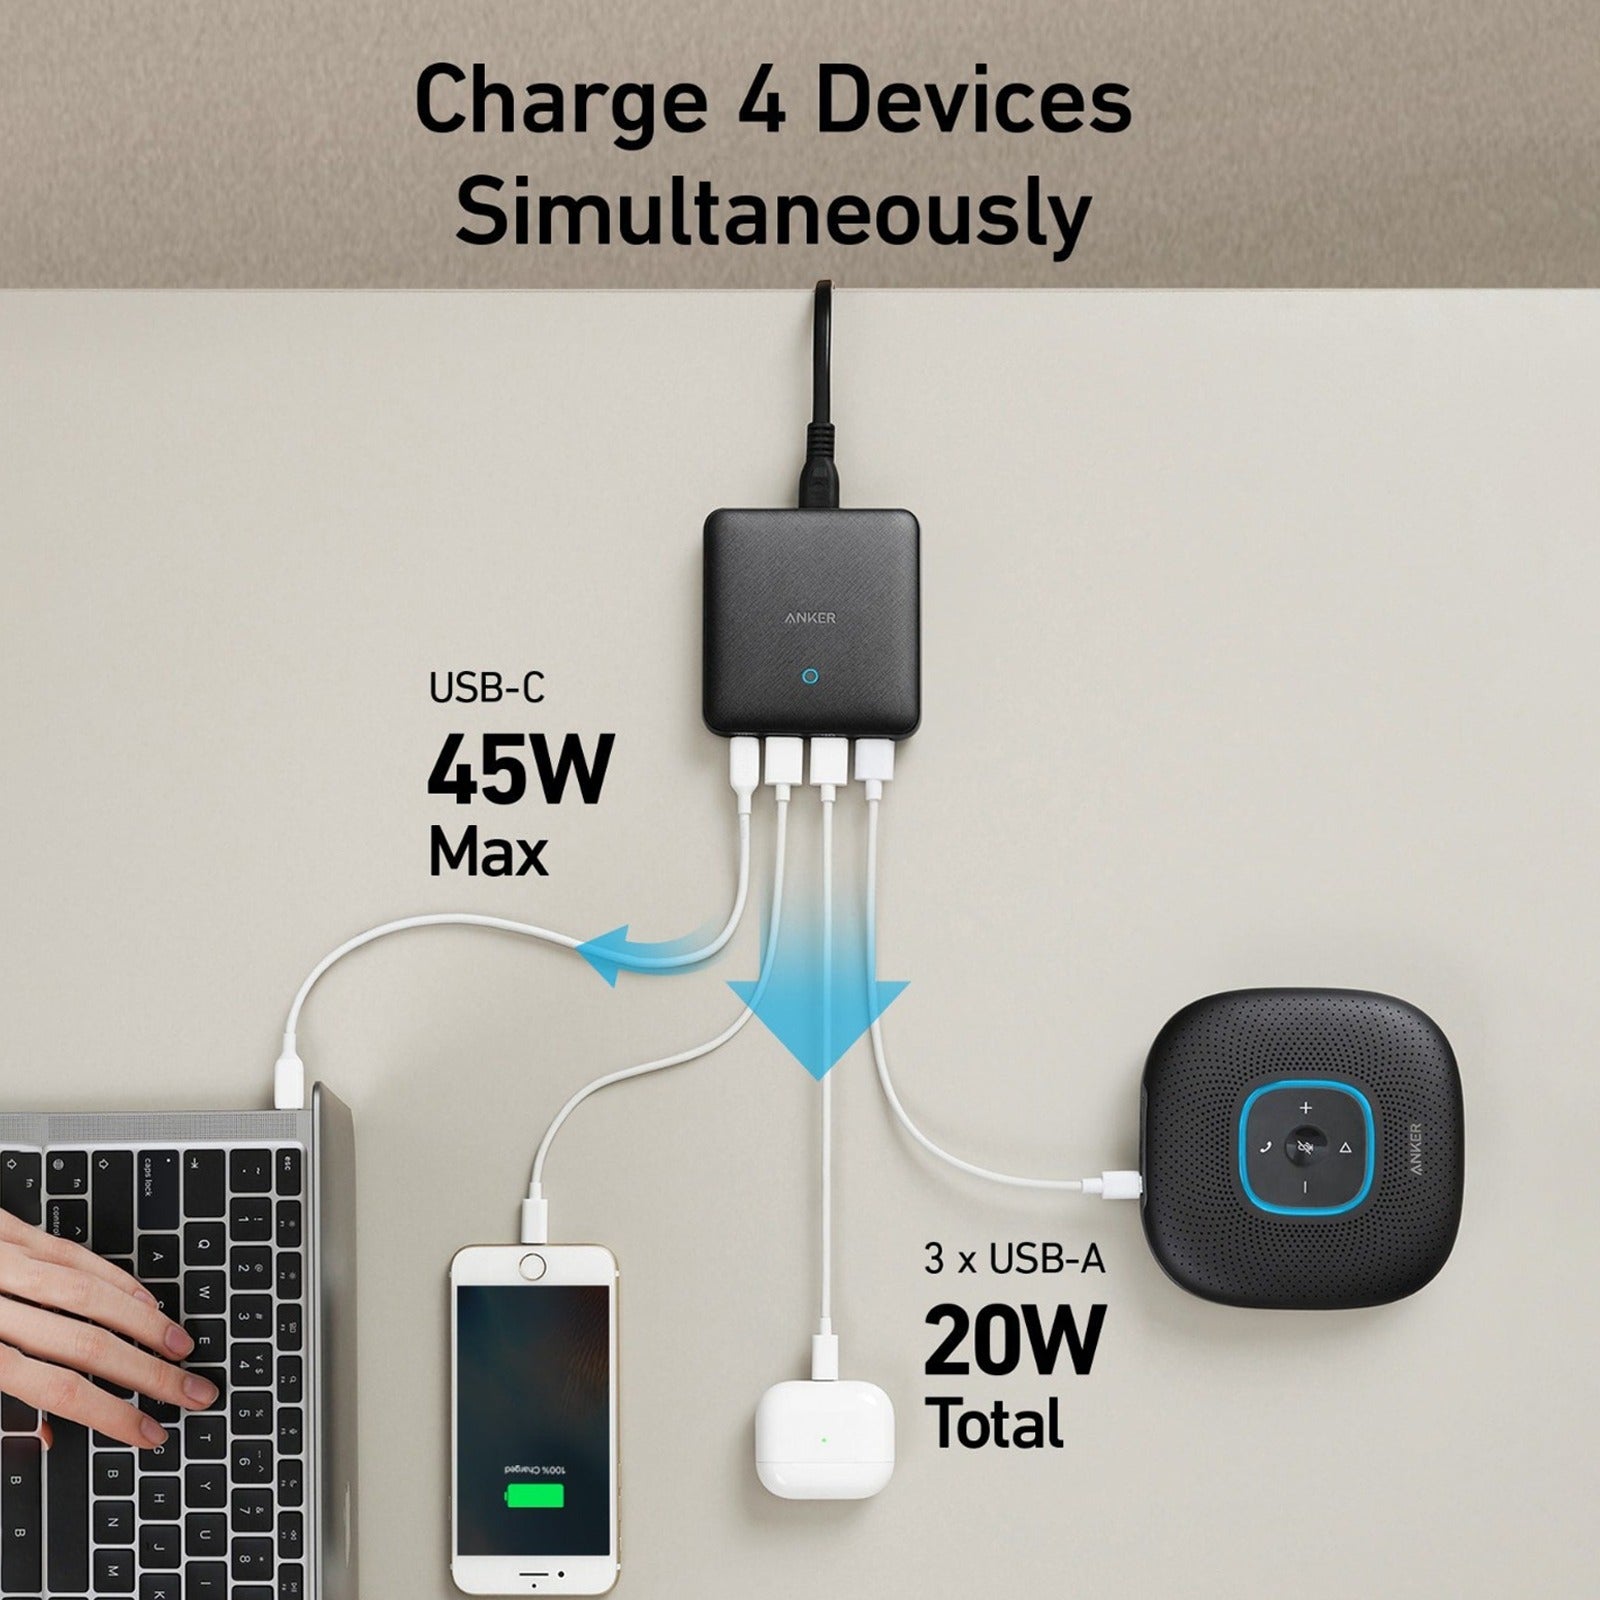 Charge 4 devices simultaneously with Anker PowerPort Atom 3 Slim 65W